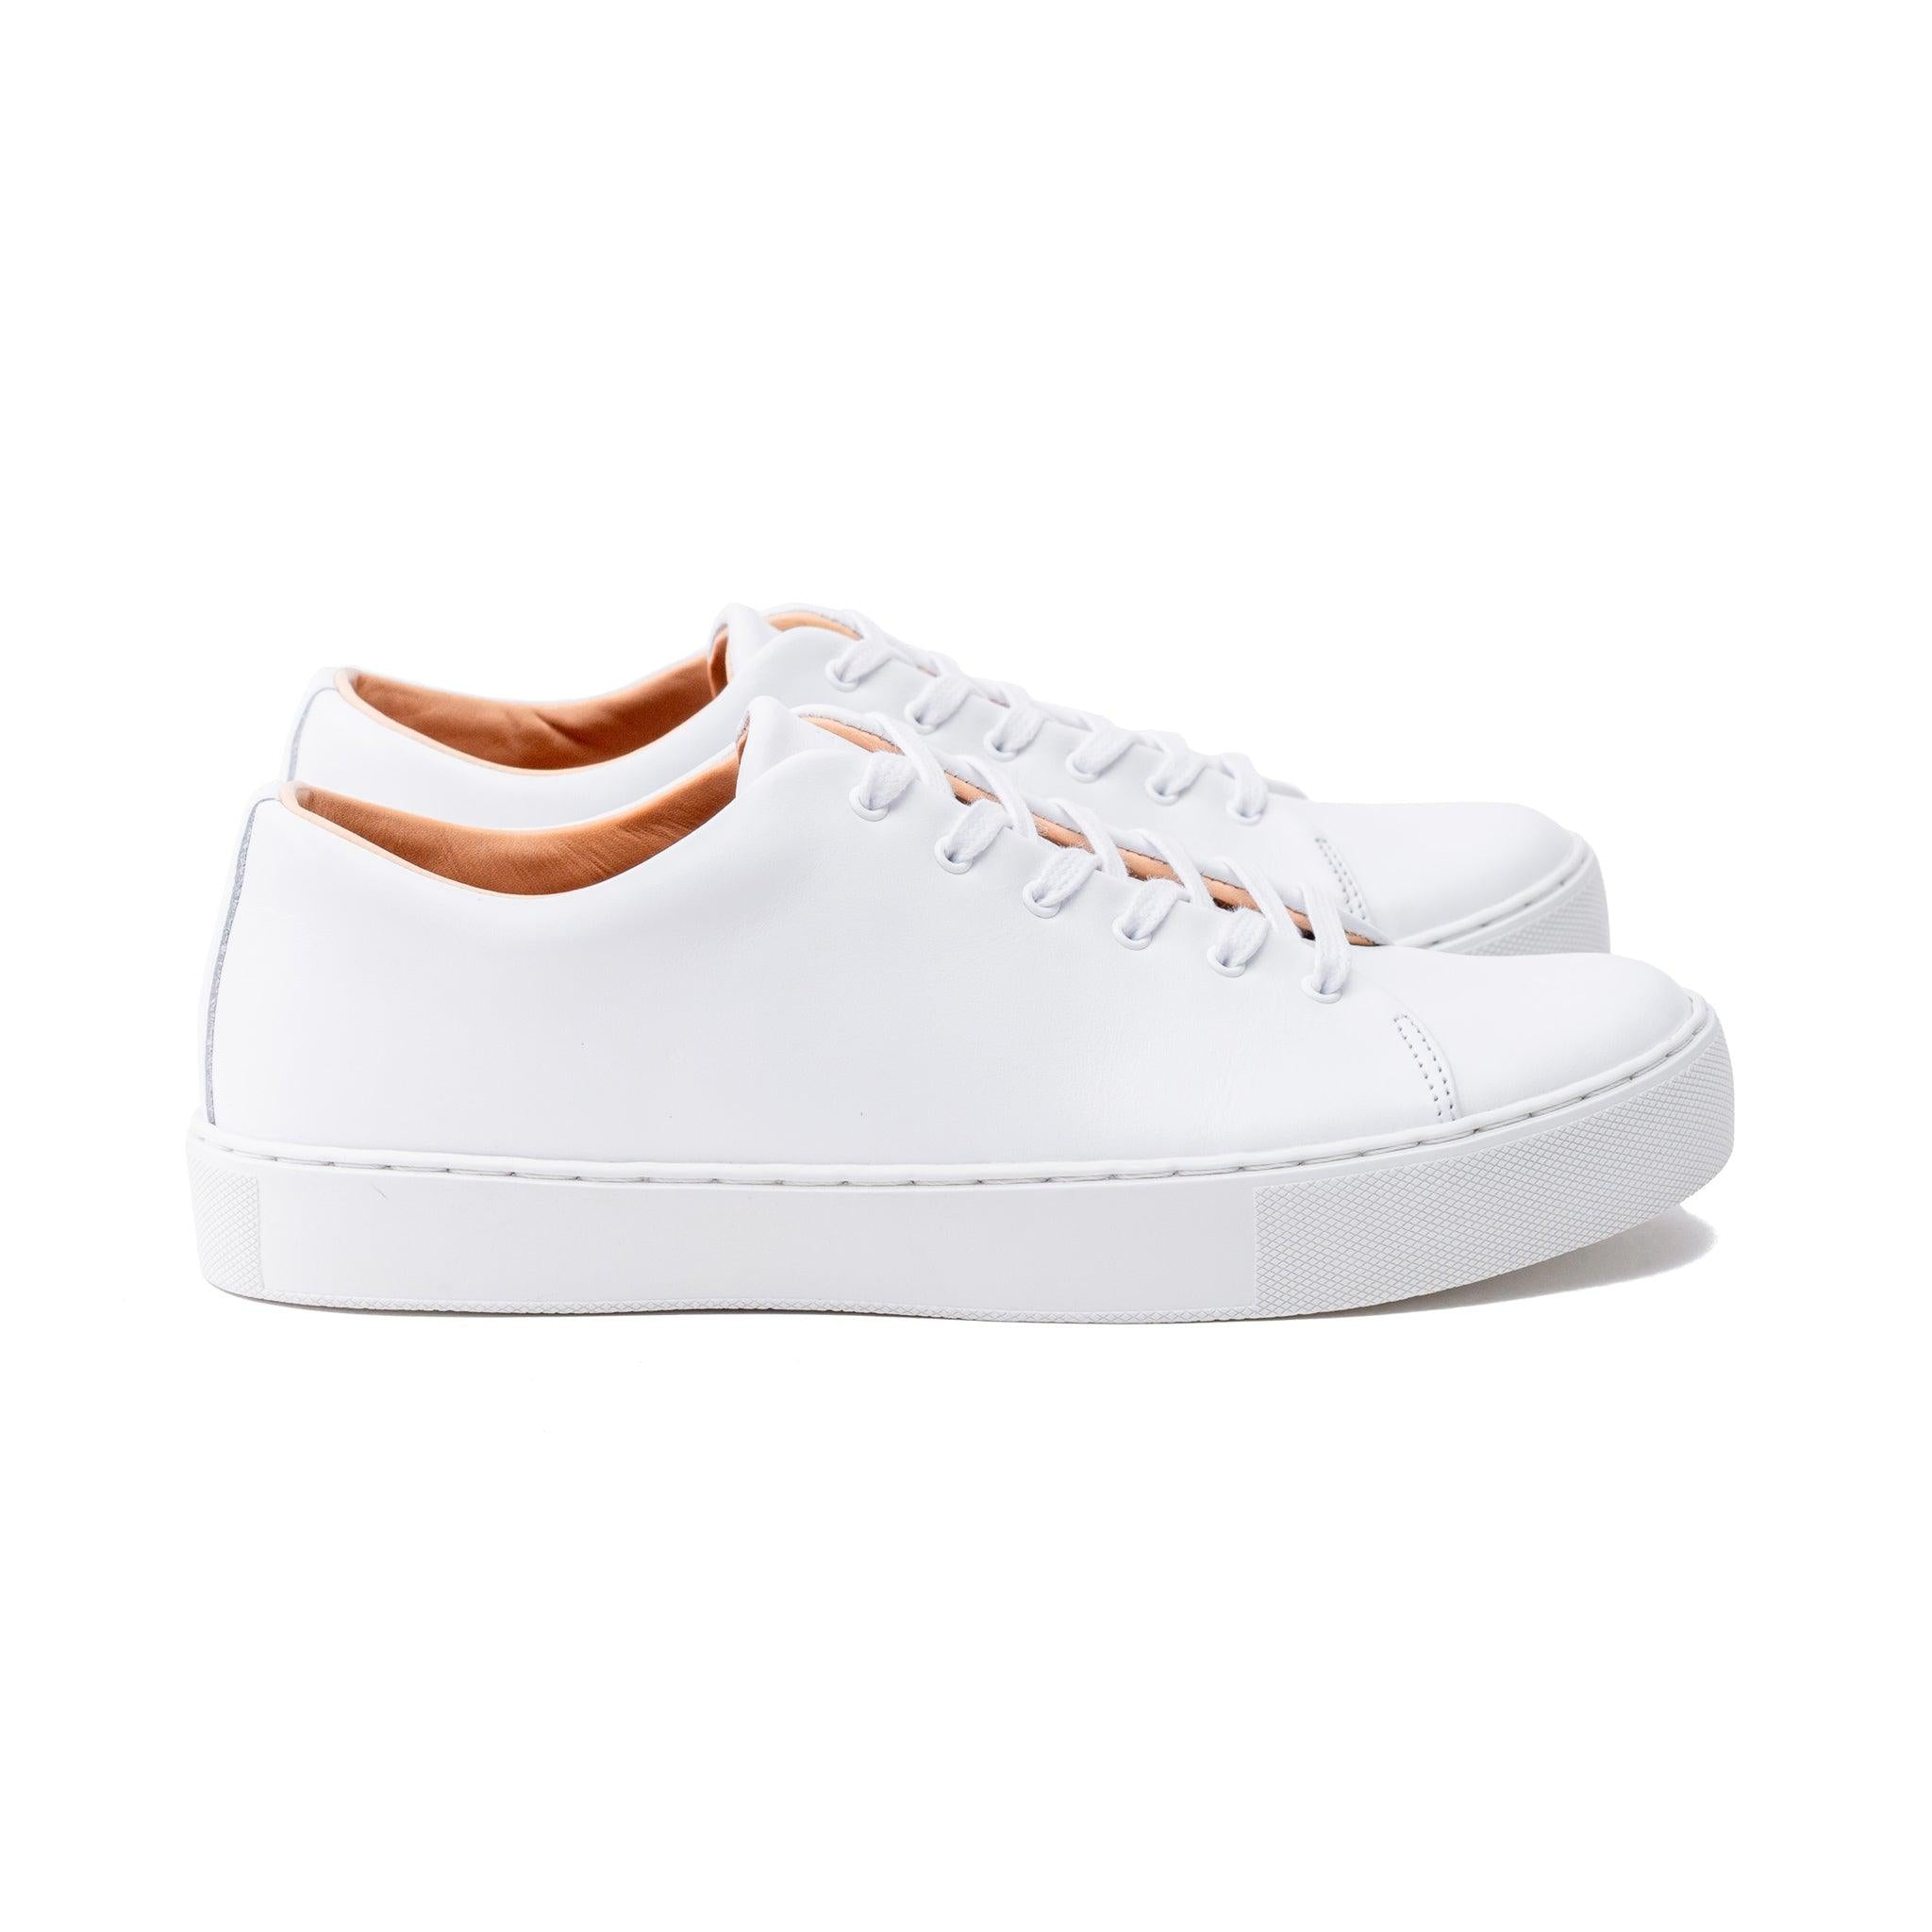 white all leather sneakers